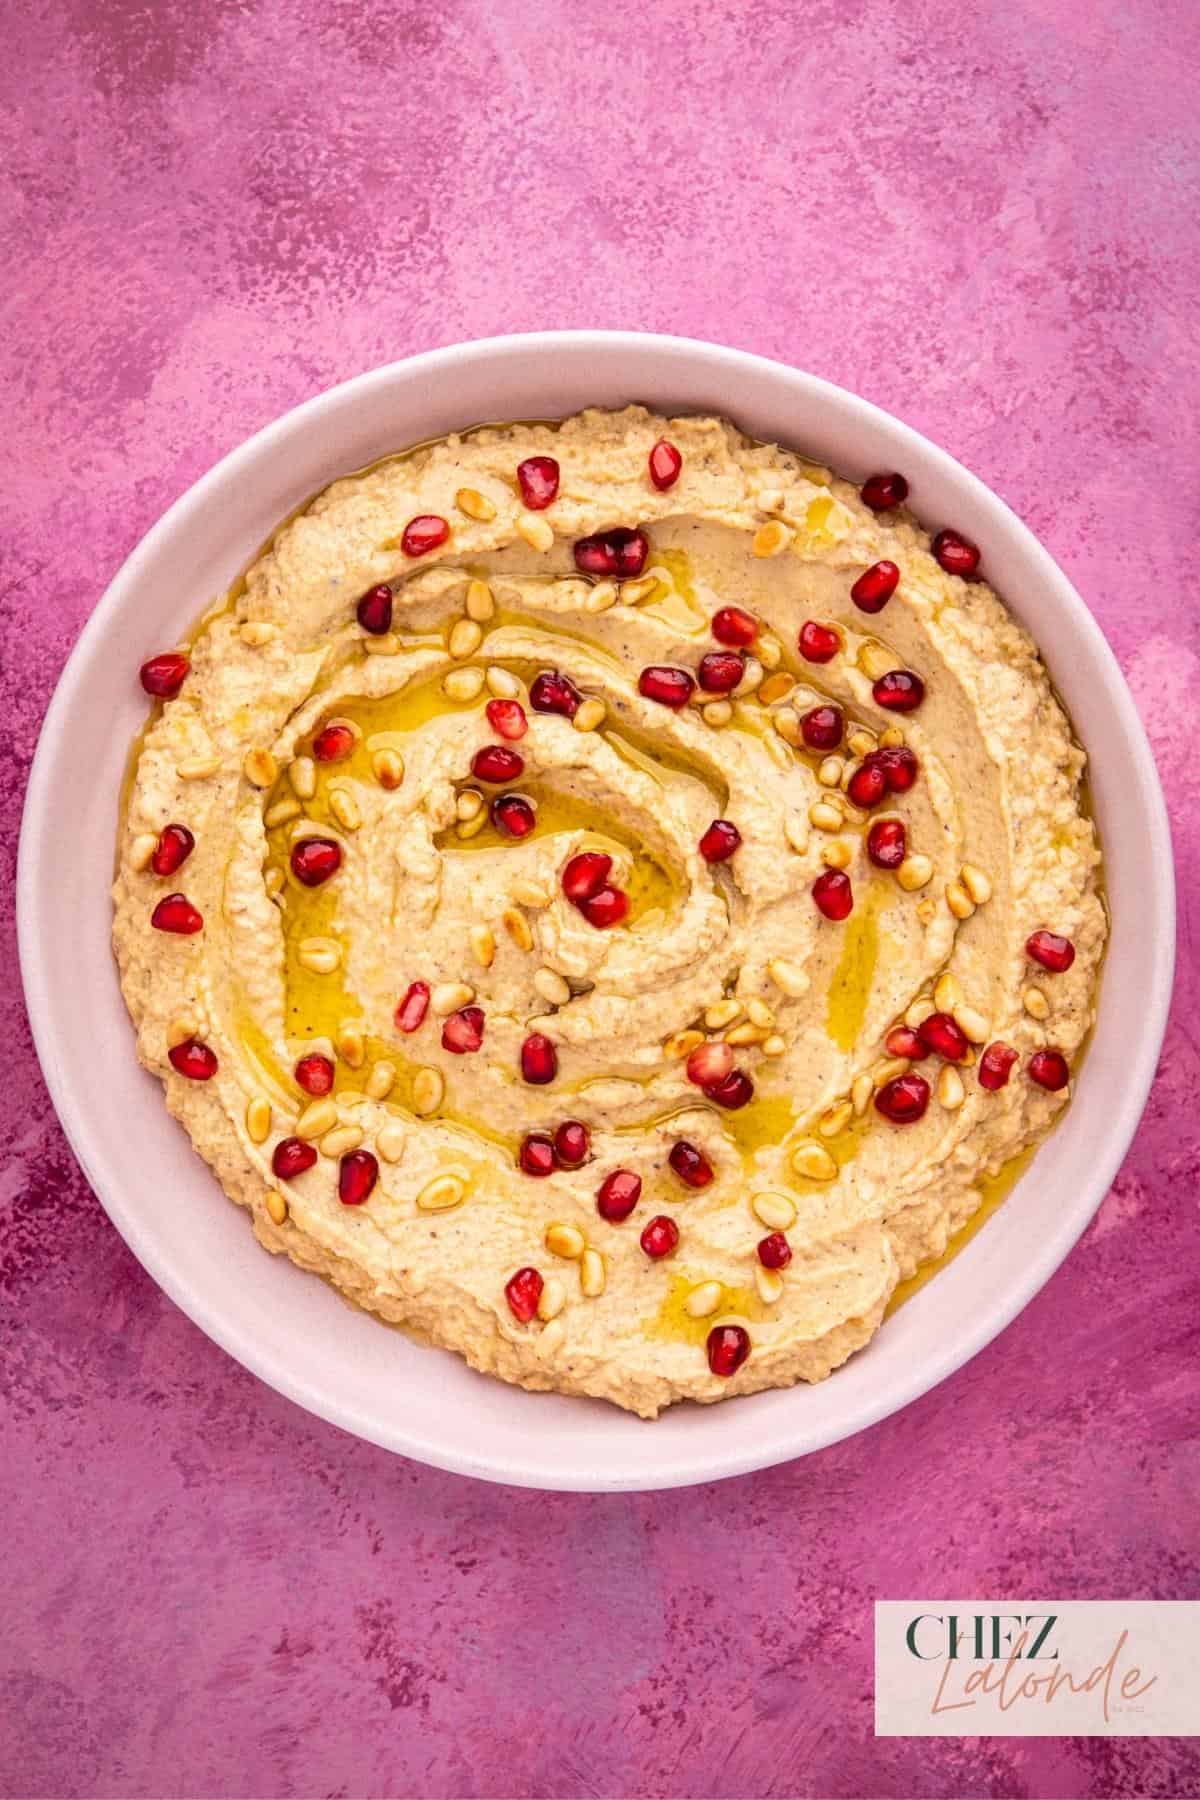 A bowl of Baba Ganoush that garnished with Pomegranate seeds, toasted pine nuts, and olive oil.